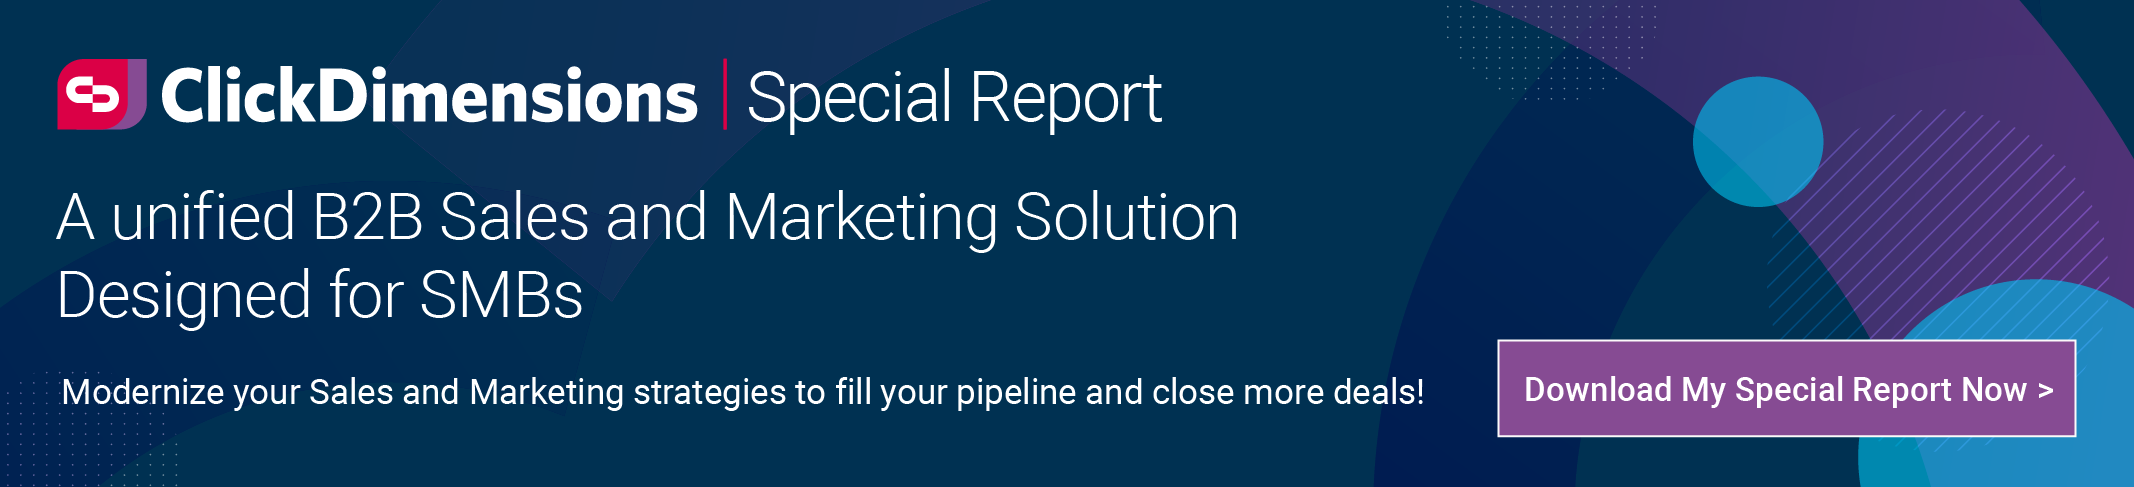 Sales-marketing-unification-special-report